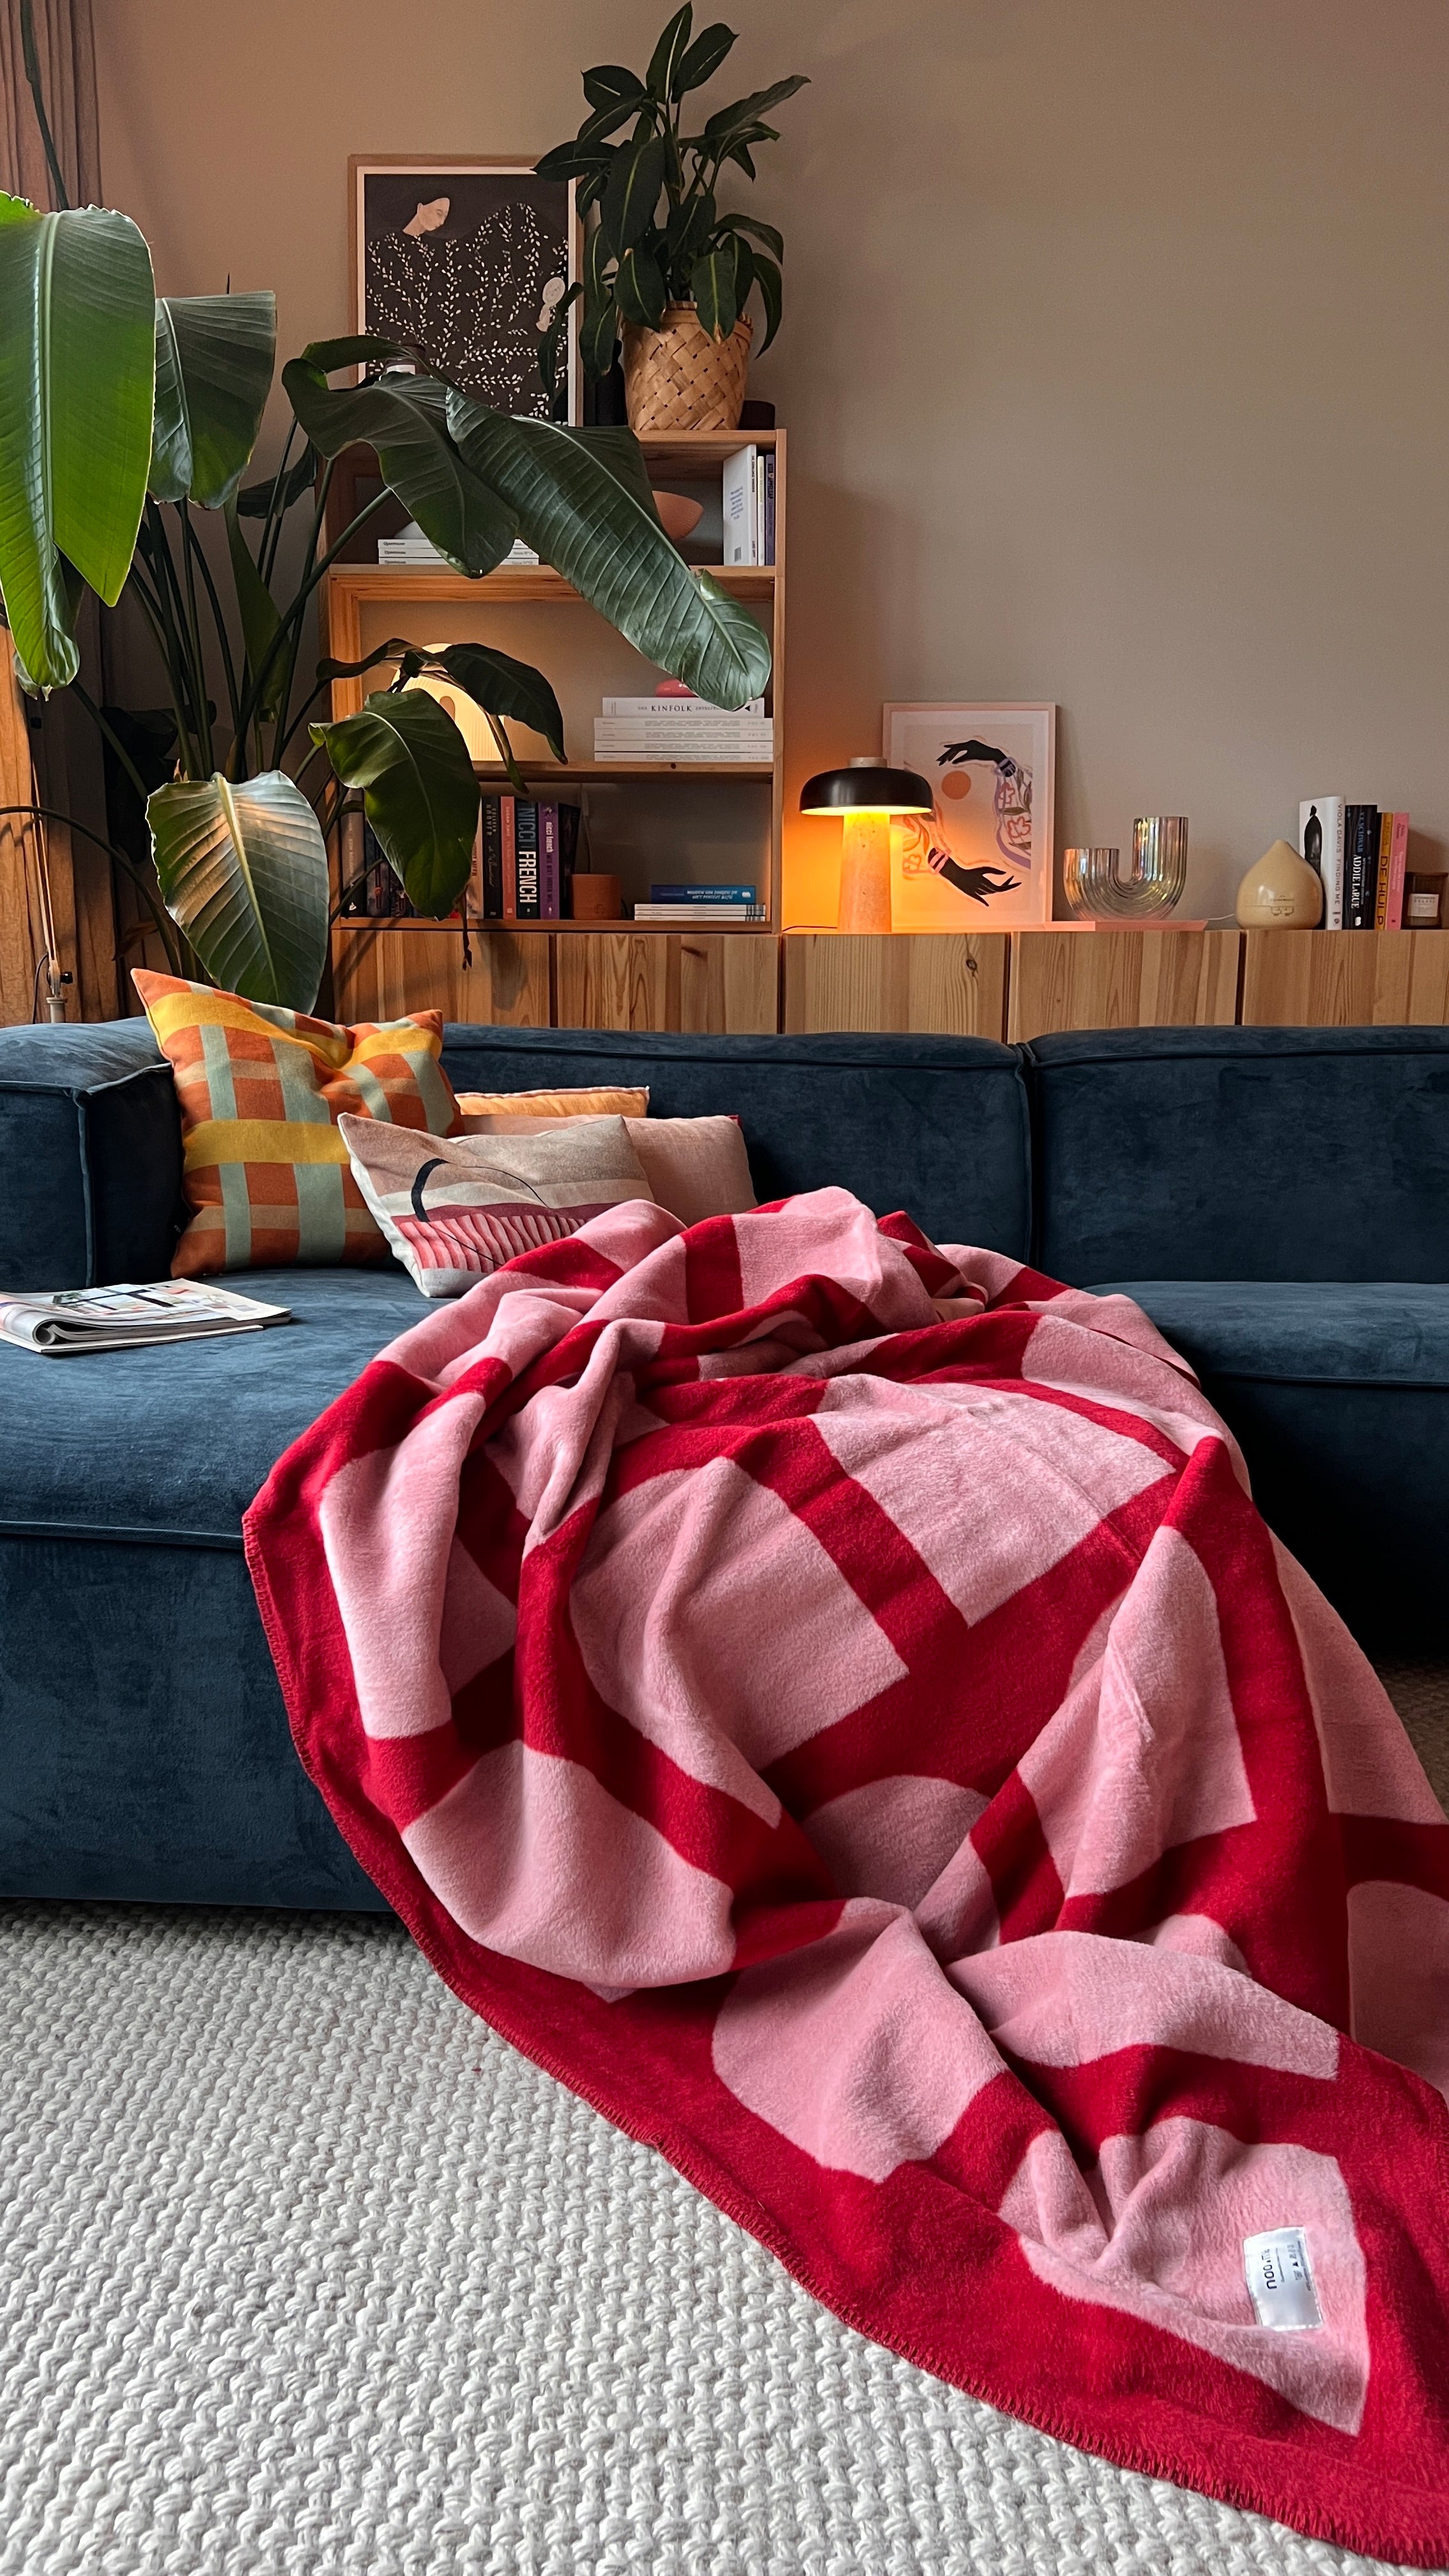 Step into comfort and explore living room ideas for small, cozy, and aesthetic spaces. Discover modern designs including coffee tables, poufs, stools, side tables, sofas, armchairs, ottomans, TV stands, sideboards, and more. Colorful, japandi, or minimal.